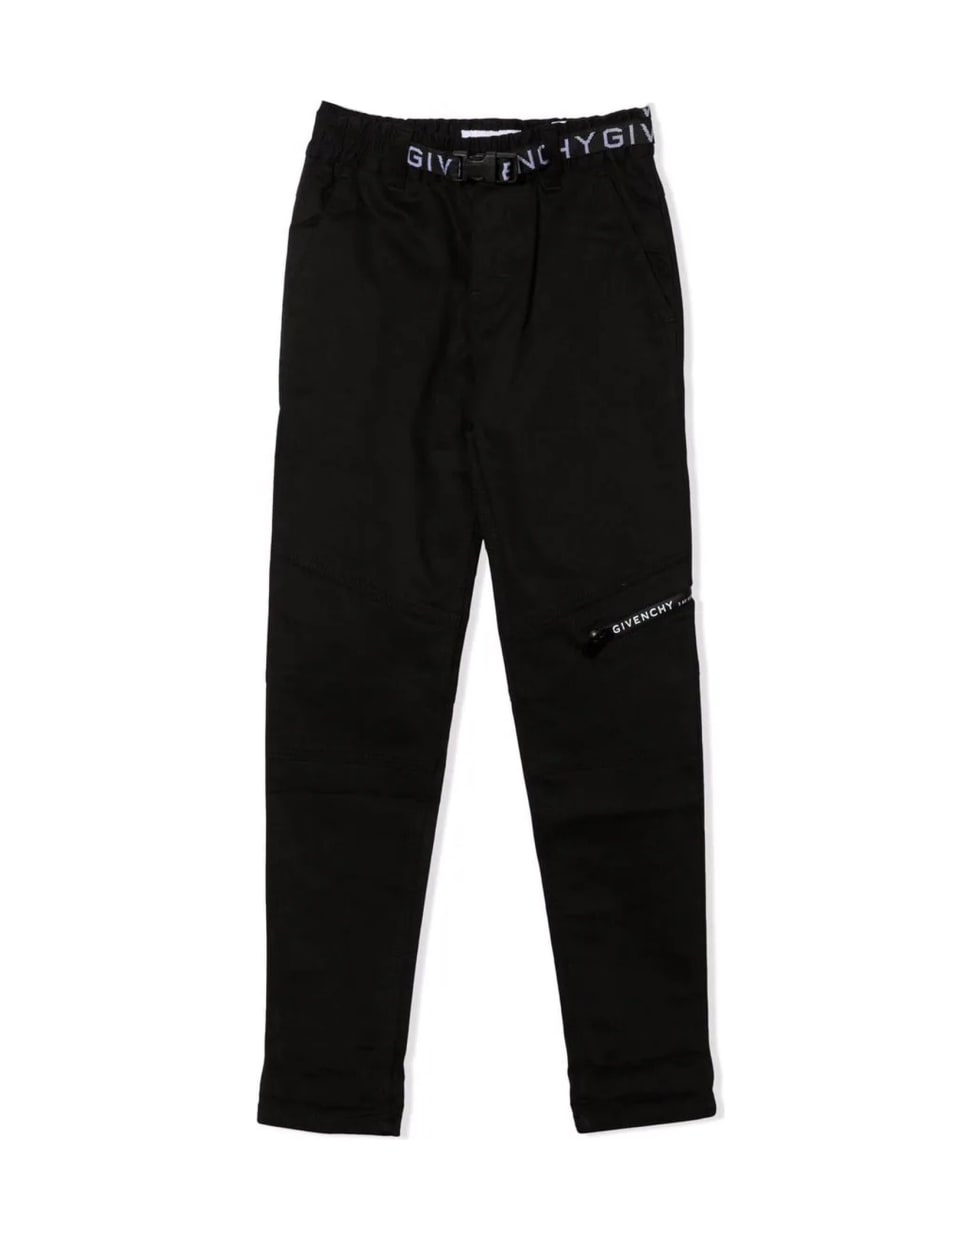 Givenchy Black Cotton Trousers - Nero